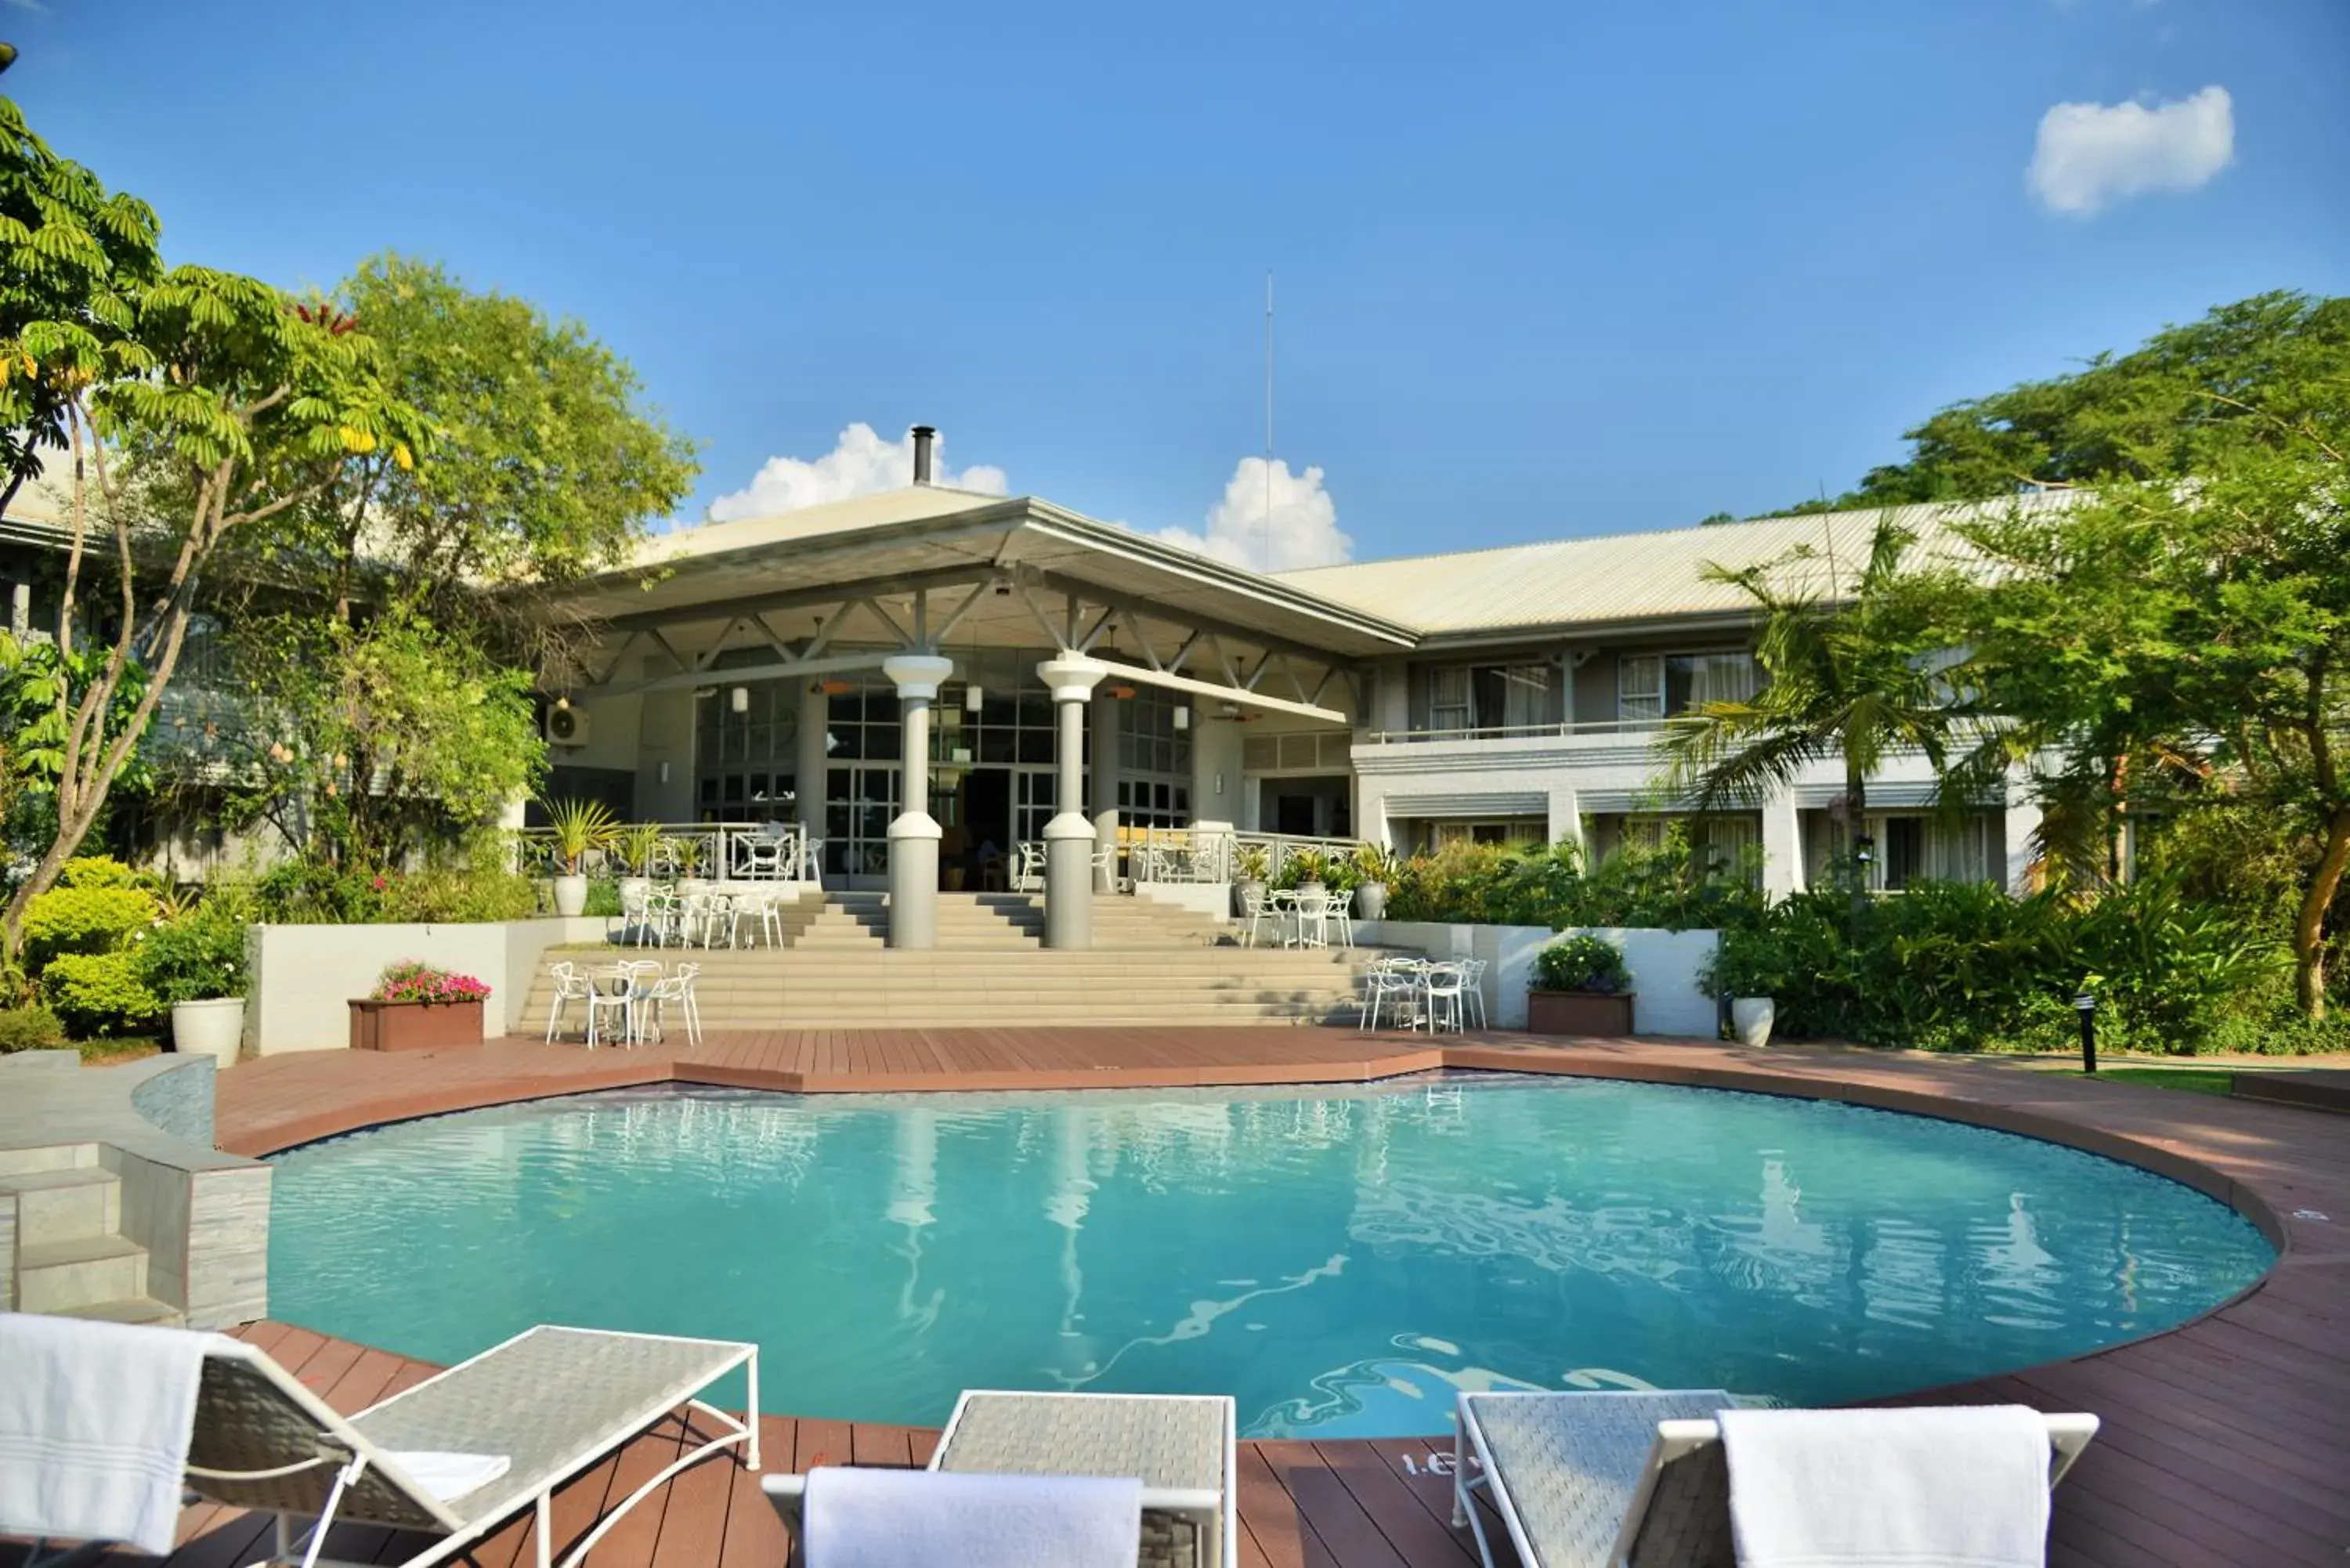 Property building, Swimming Pool in Cresta Lodge Harare